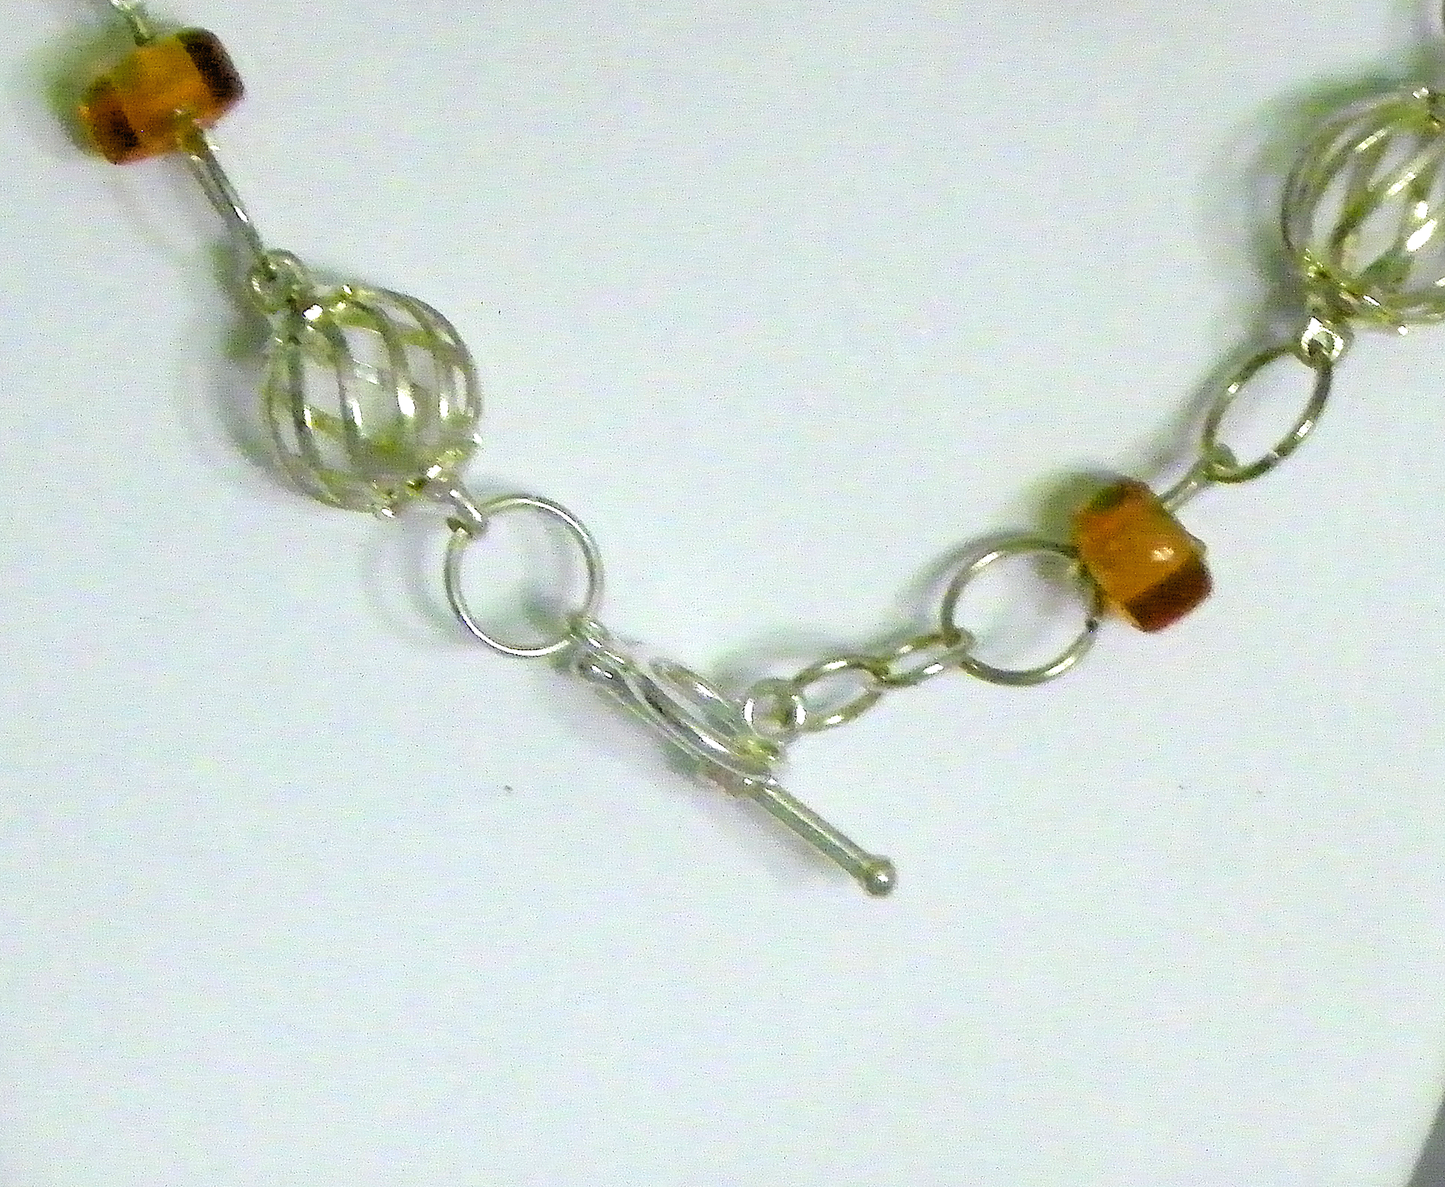 Silver Plated Spiral Wire Ball and Amber Beads Necklace and Earring Set